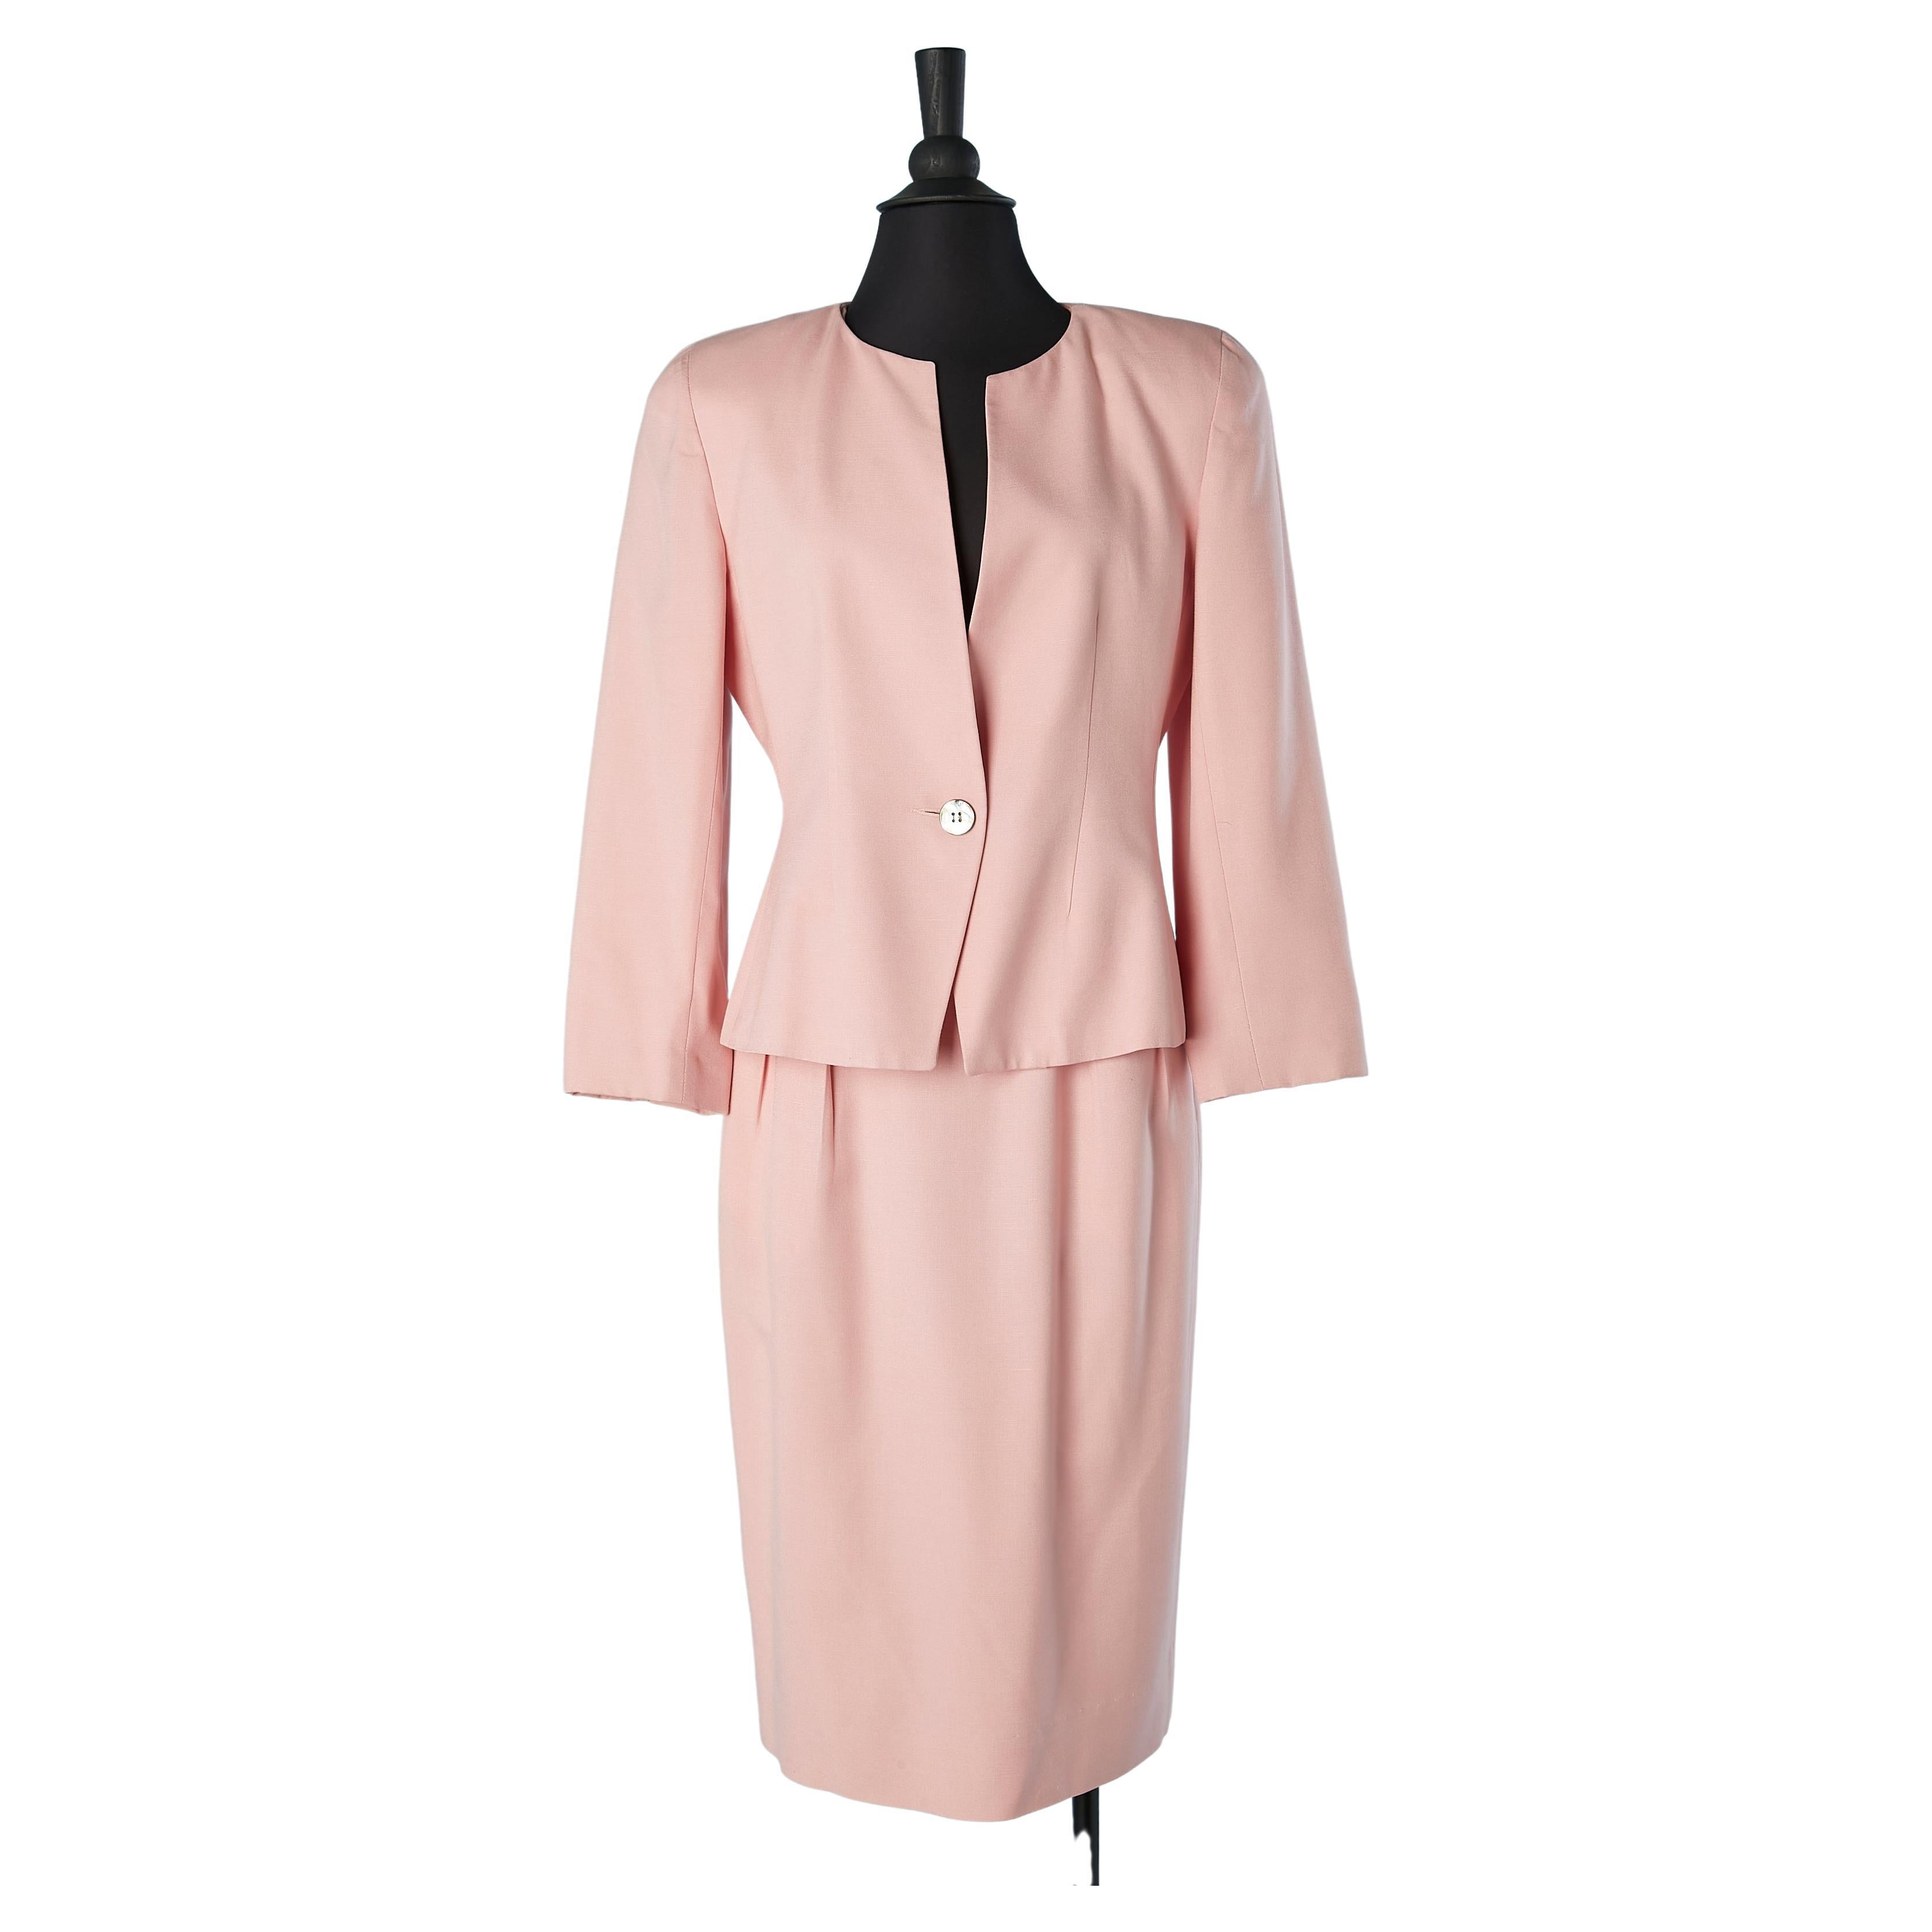 Pink skirt-suit with mother-of-shell button Christian Dior Suit "Petites" 